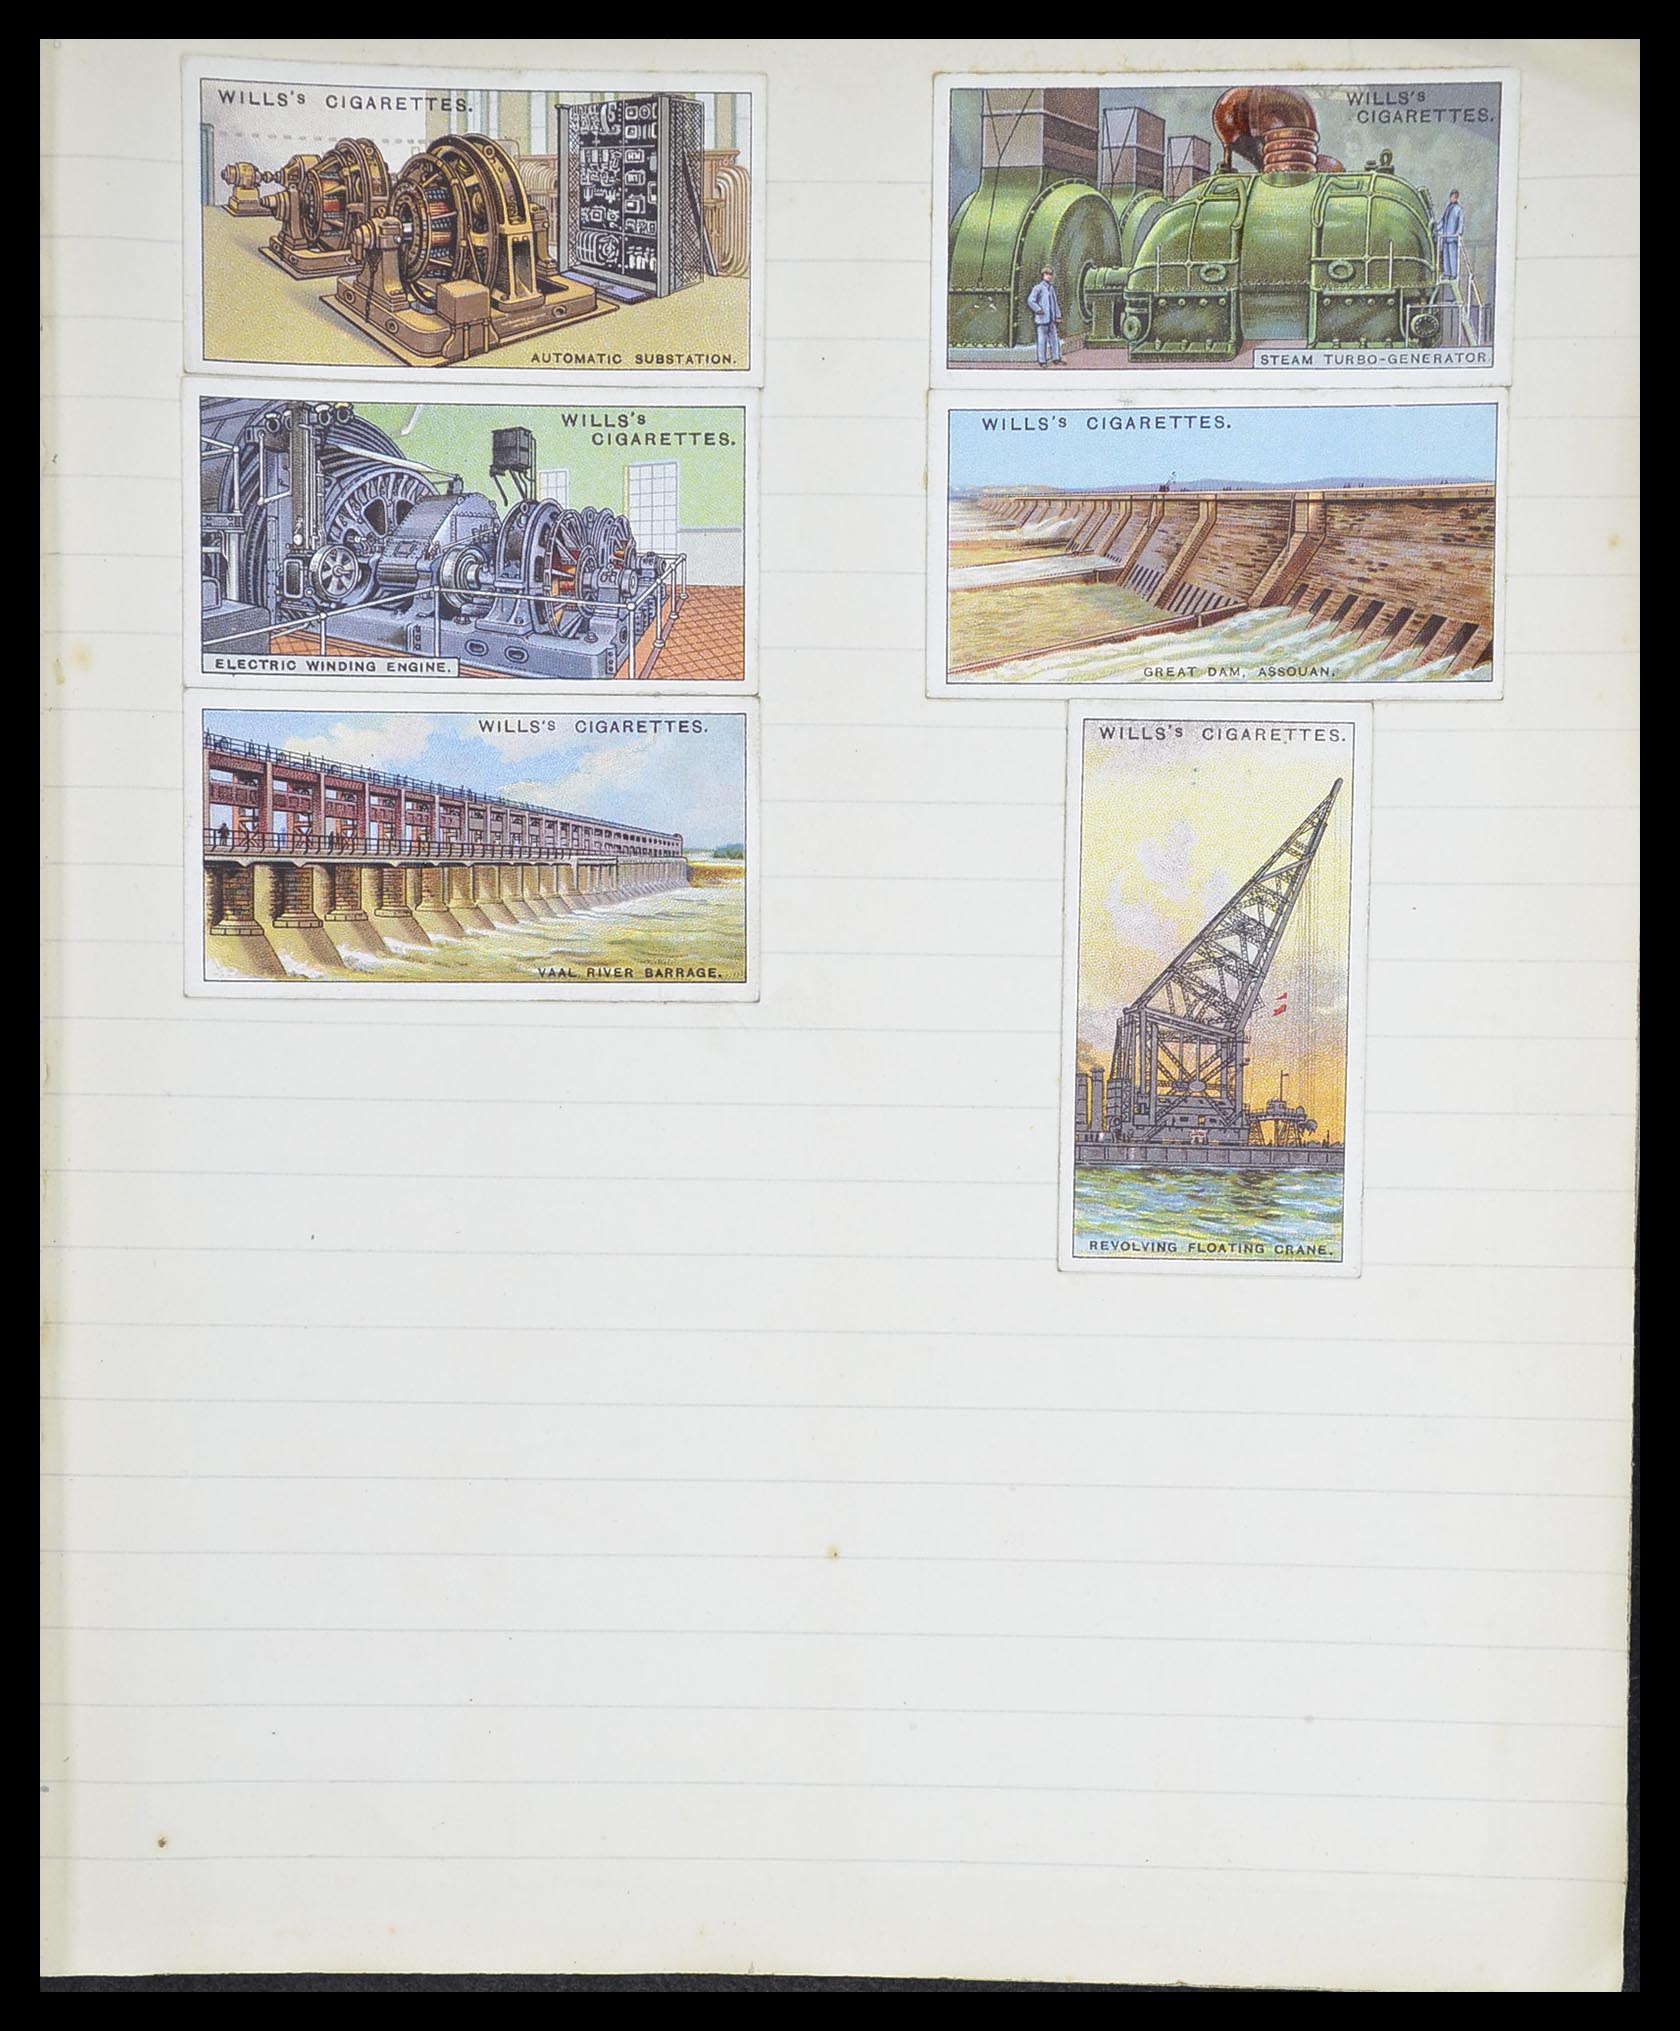 33444 099 - Stamp collection 33444 Great Britain cigarette cards.